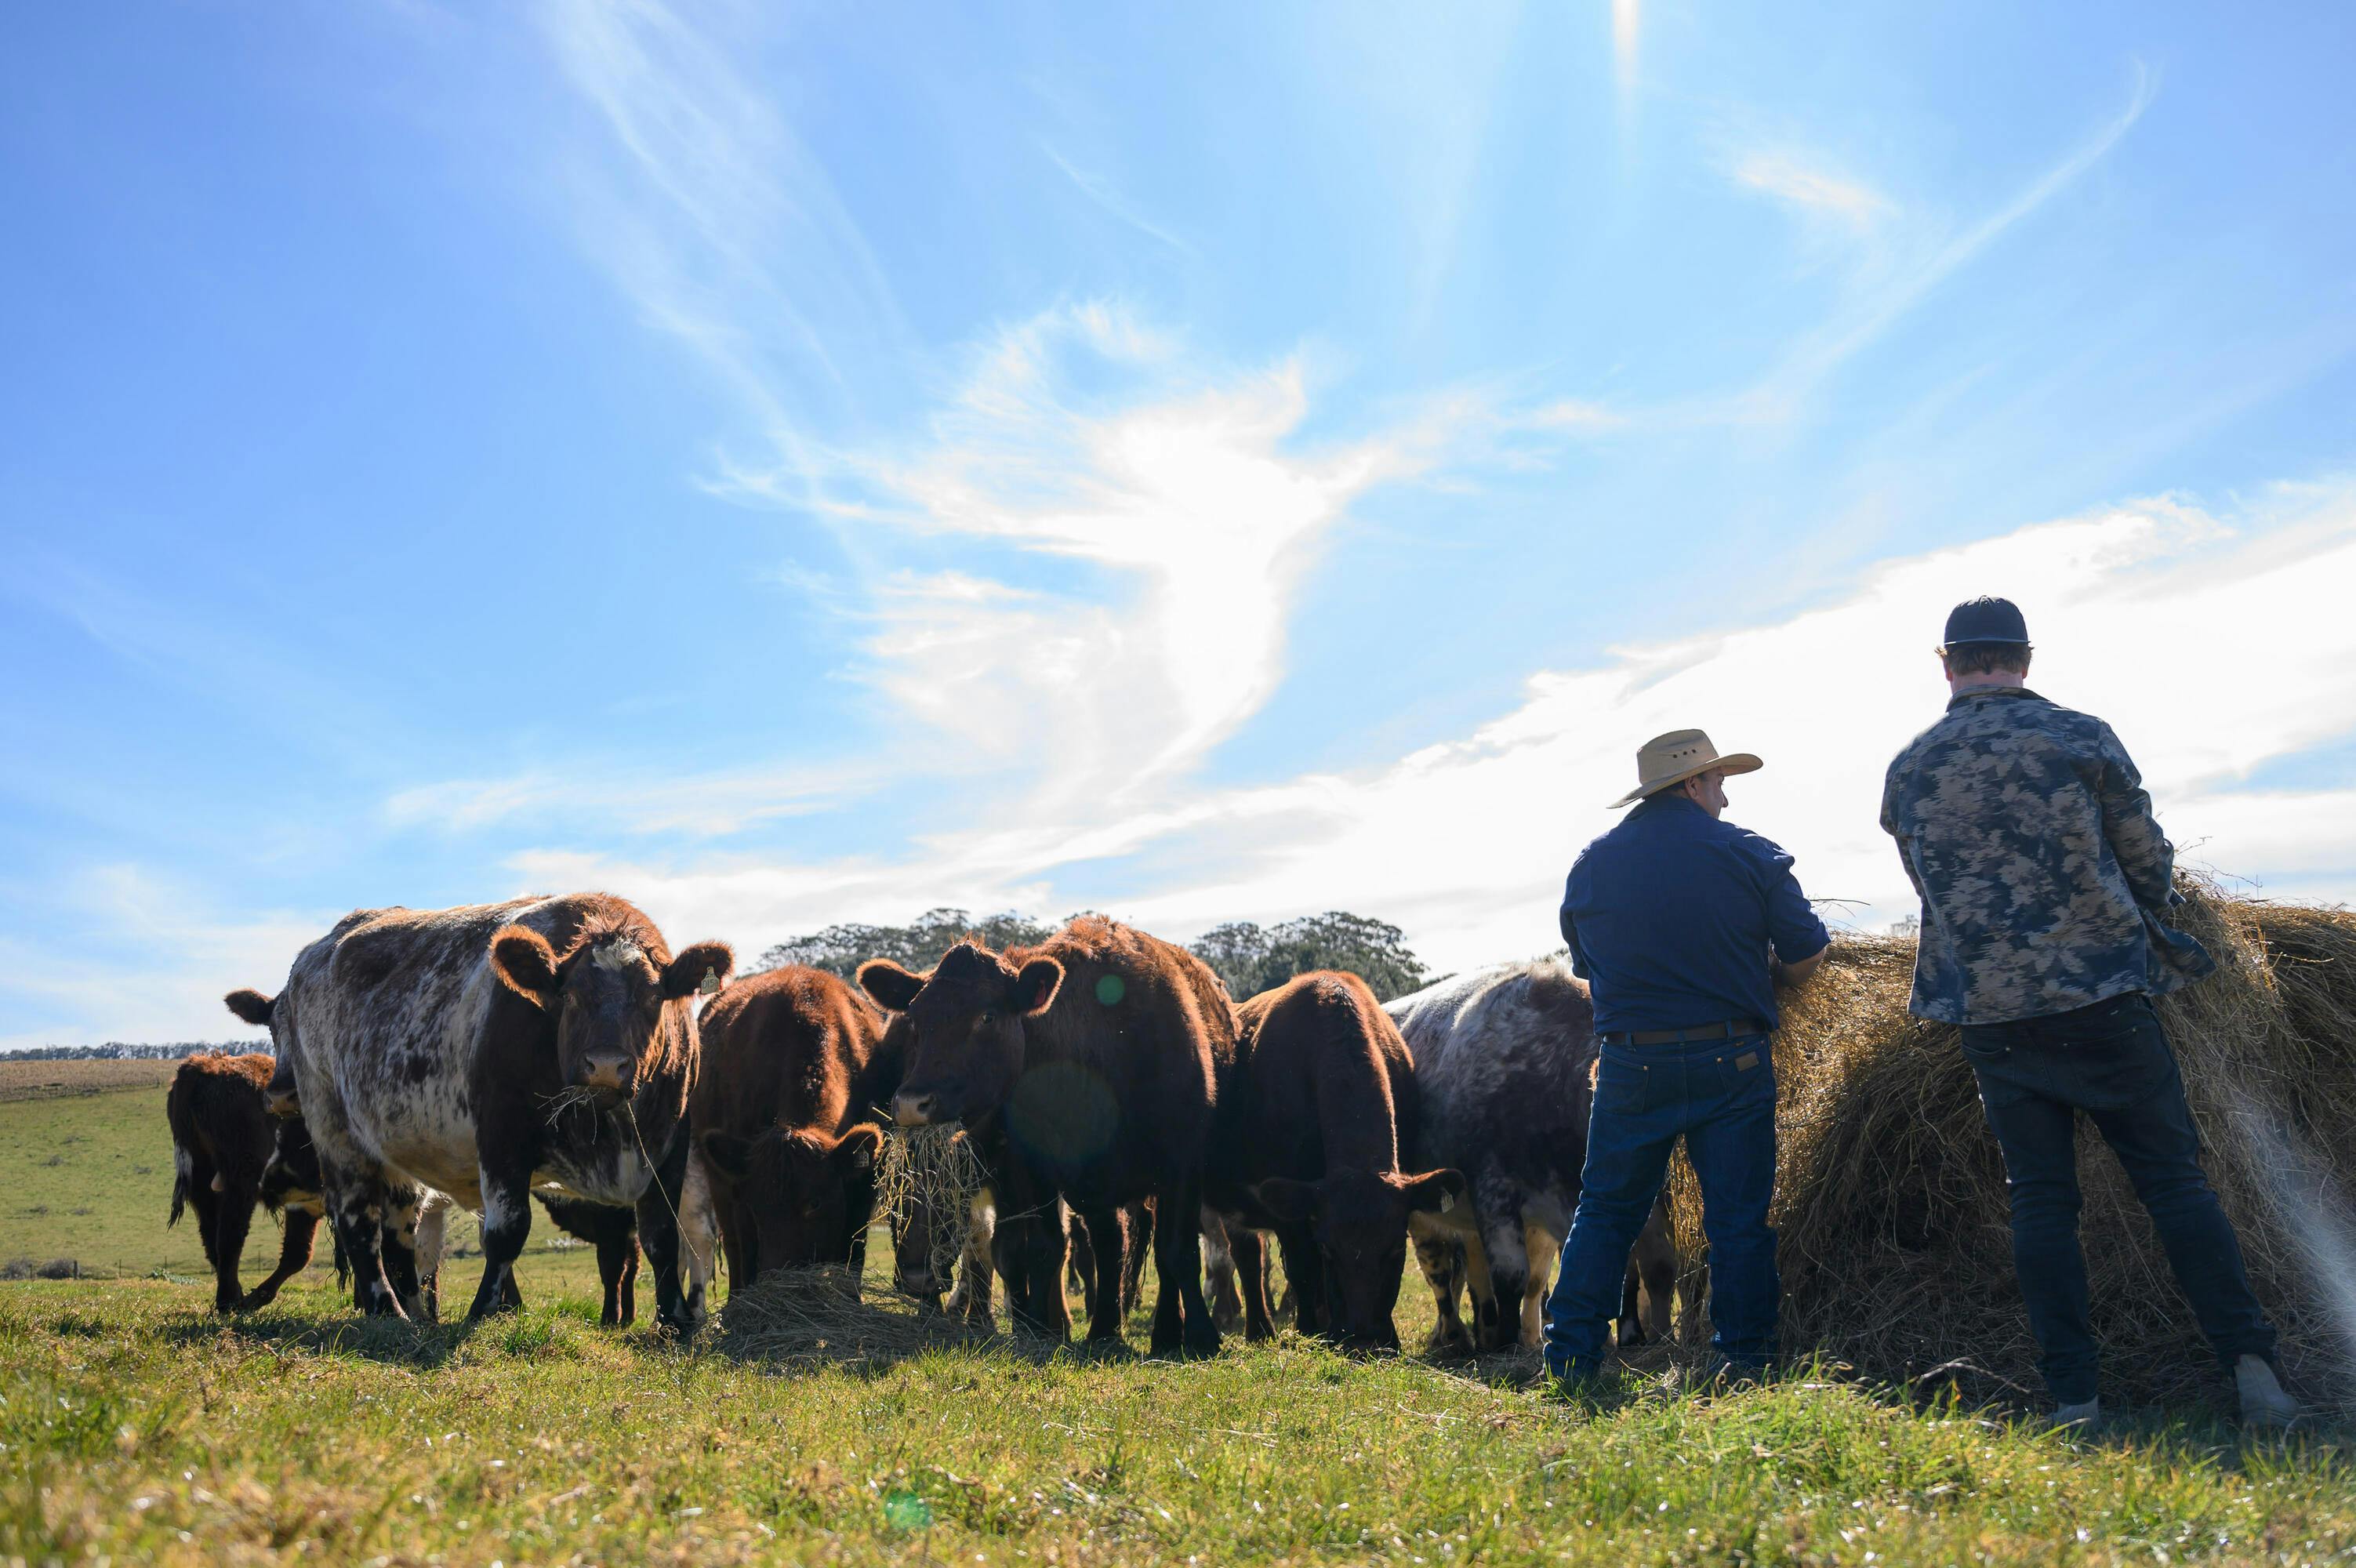 Our Cow Farmers: Aussie Leaders in Sustainable Farming Practice